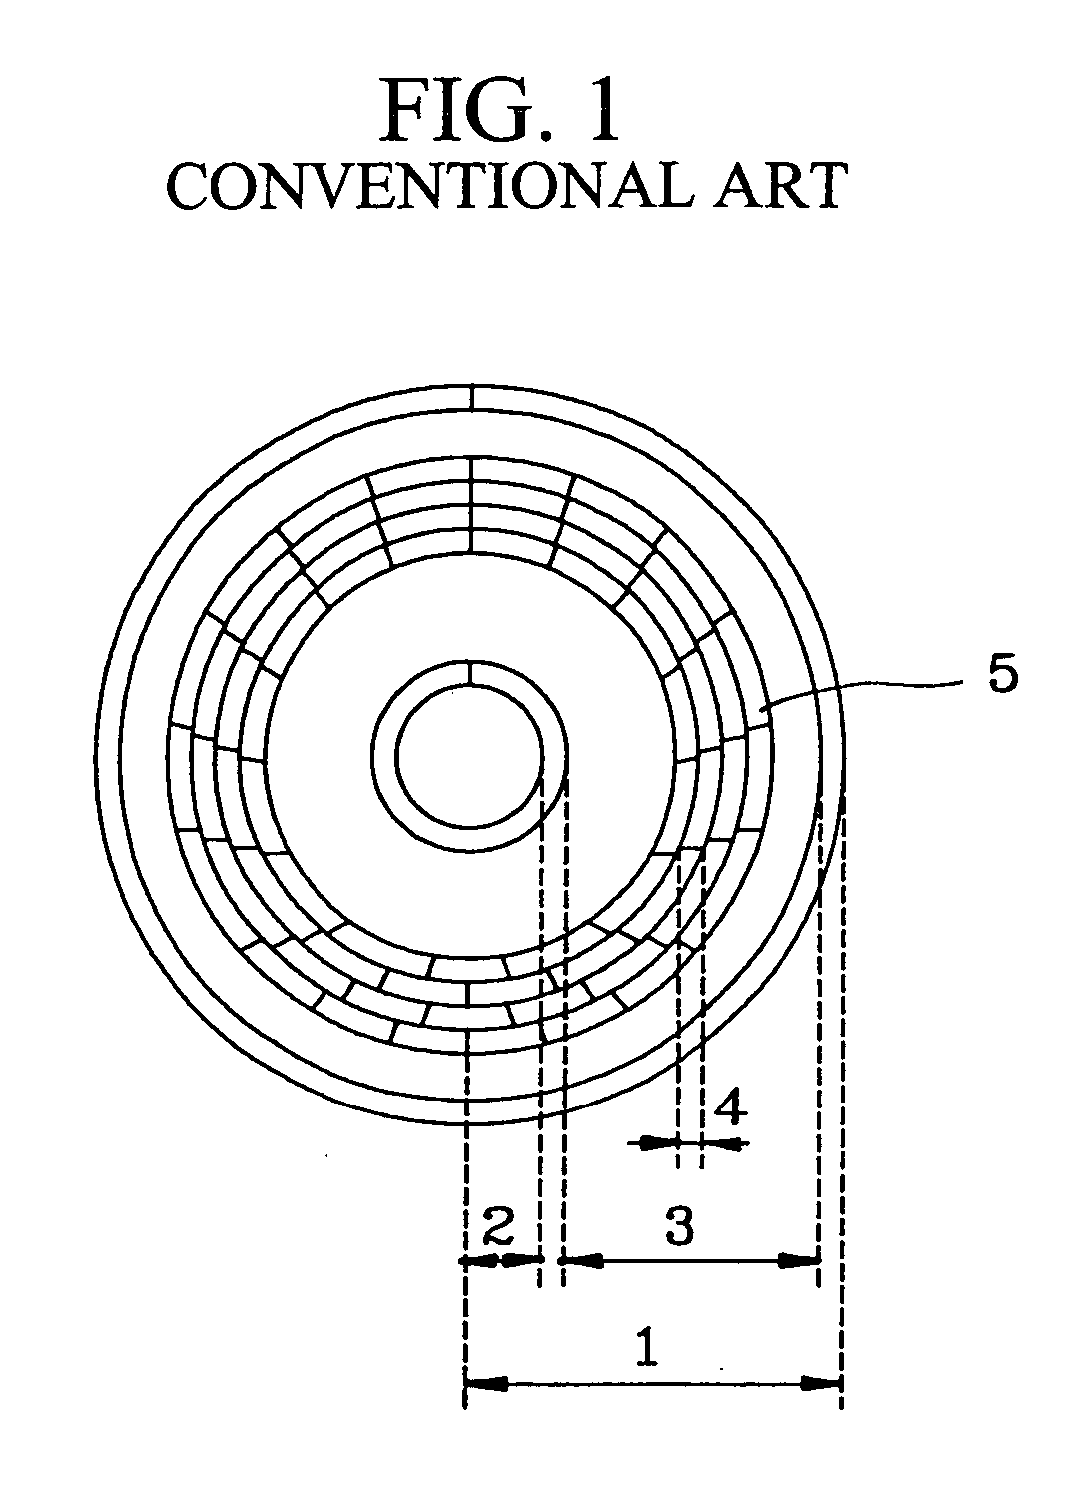 Optical disc having variable spare area rates and method for variably setting the rate of spare areas in the optical disc